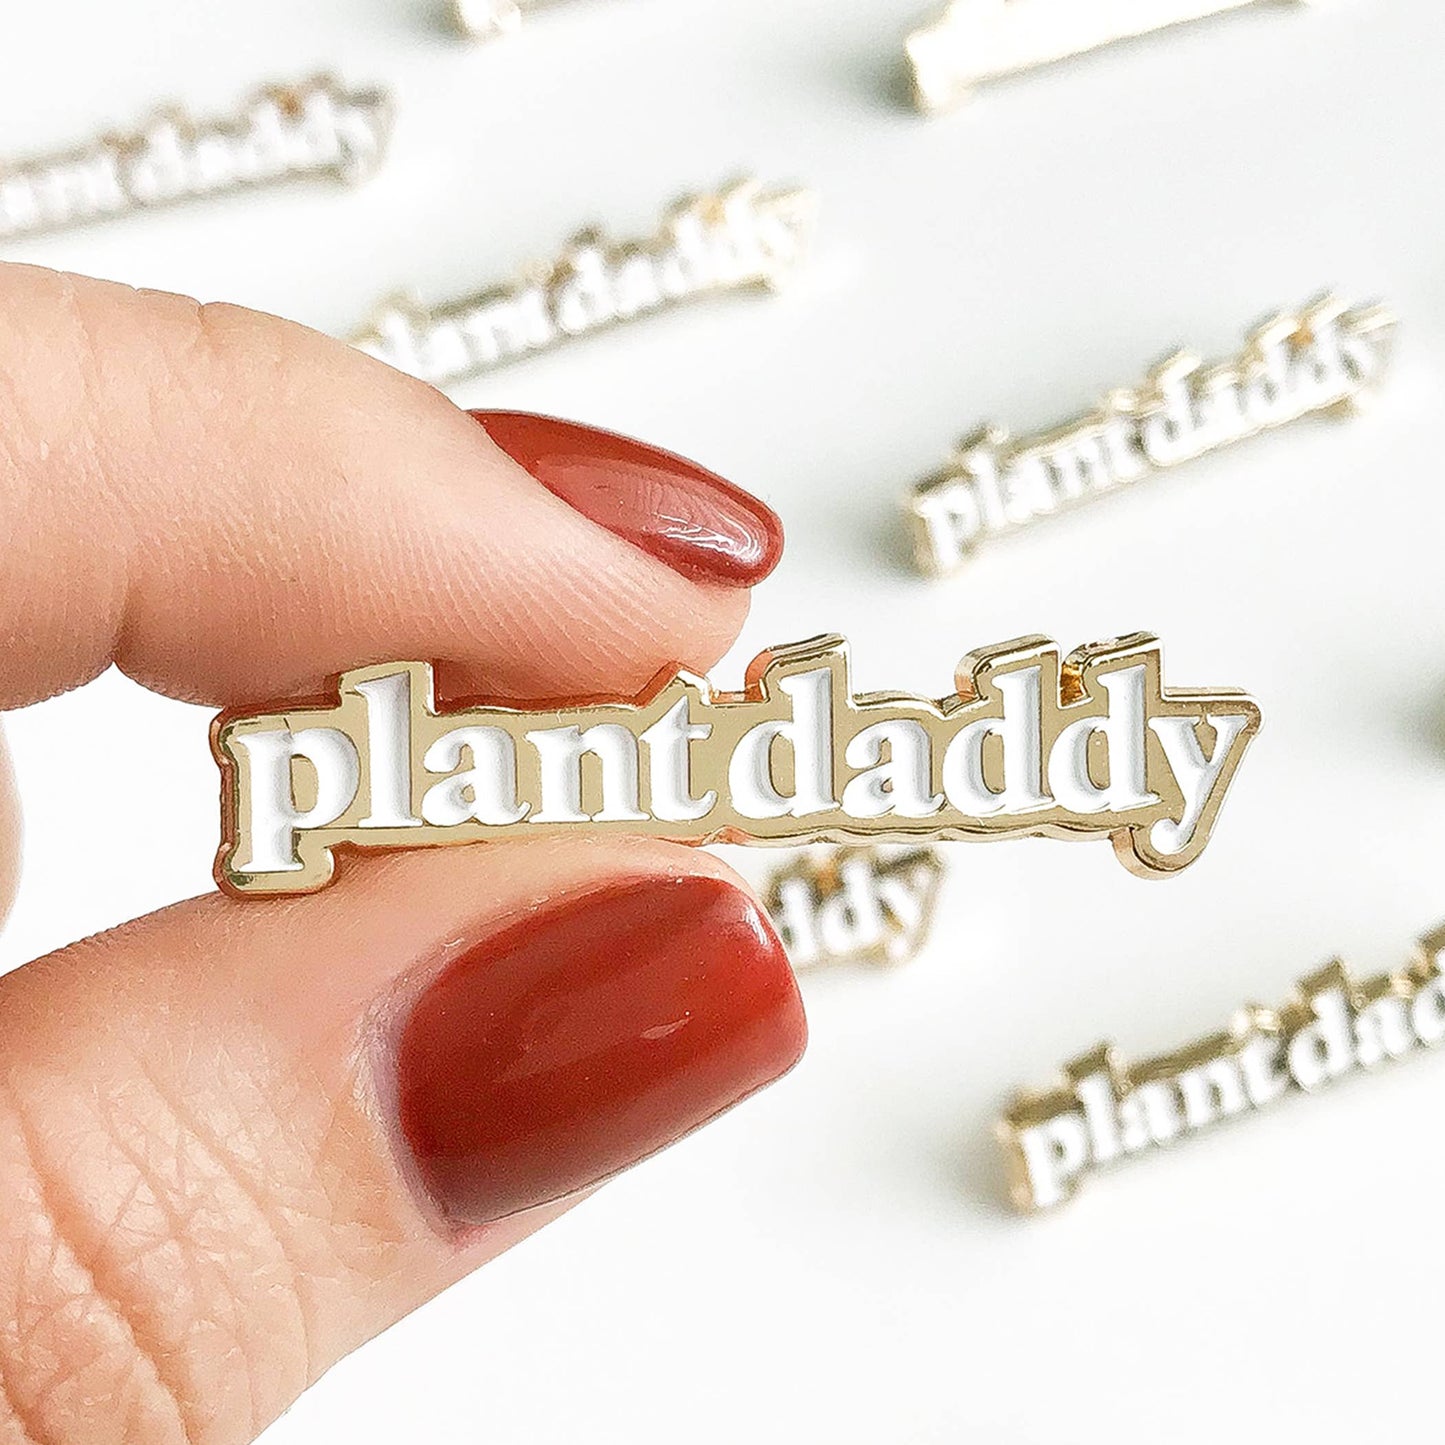 Plant Daddy Pin